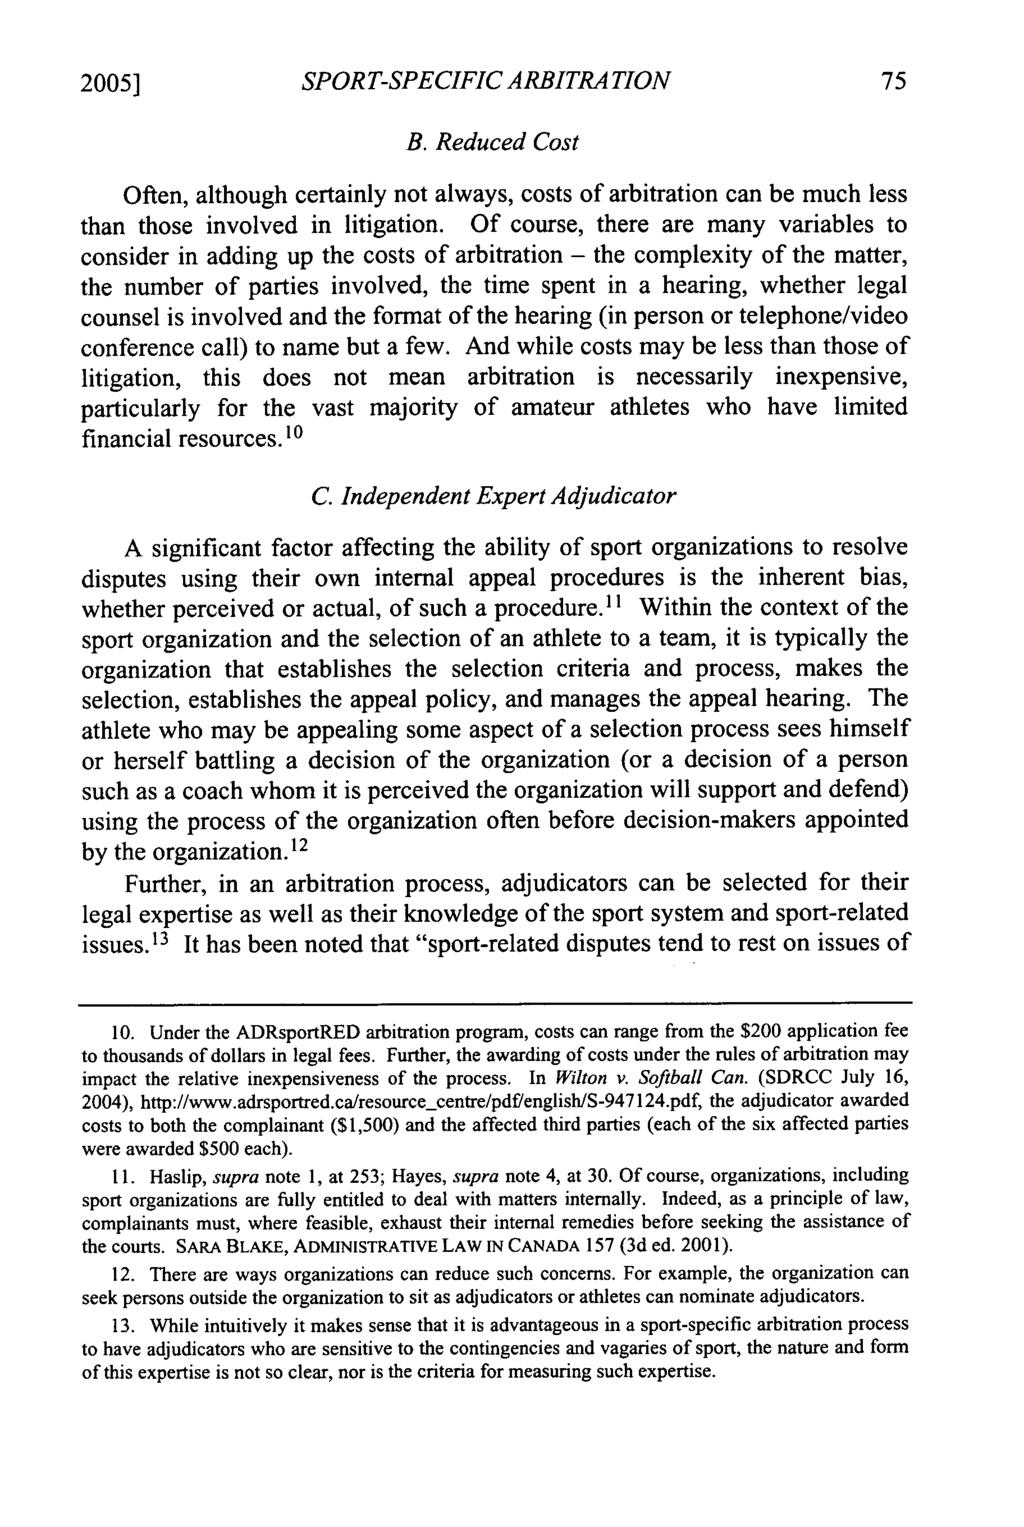 2005] SPORT-SPECIFIC ARBITRATION B. Reduced Cost Often, although certainly not always, costs of arbitration can be much less than those involved in litigation.